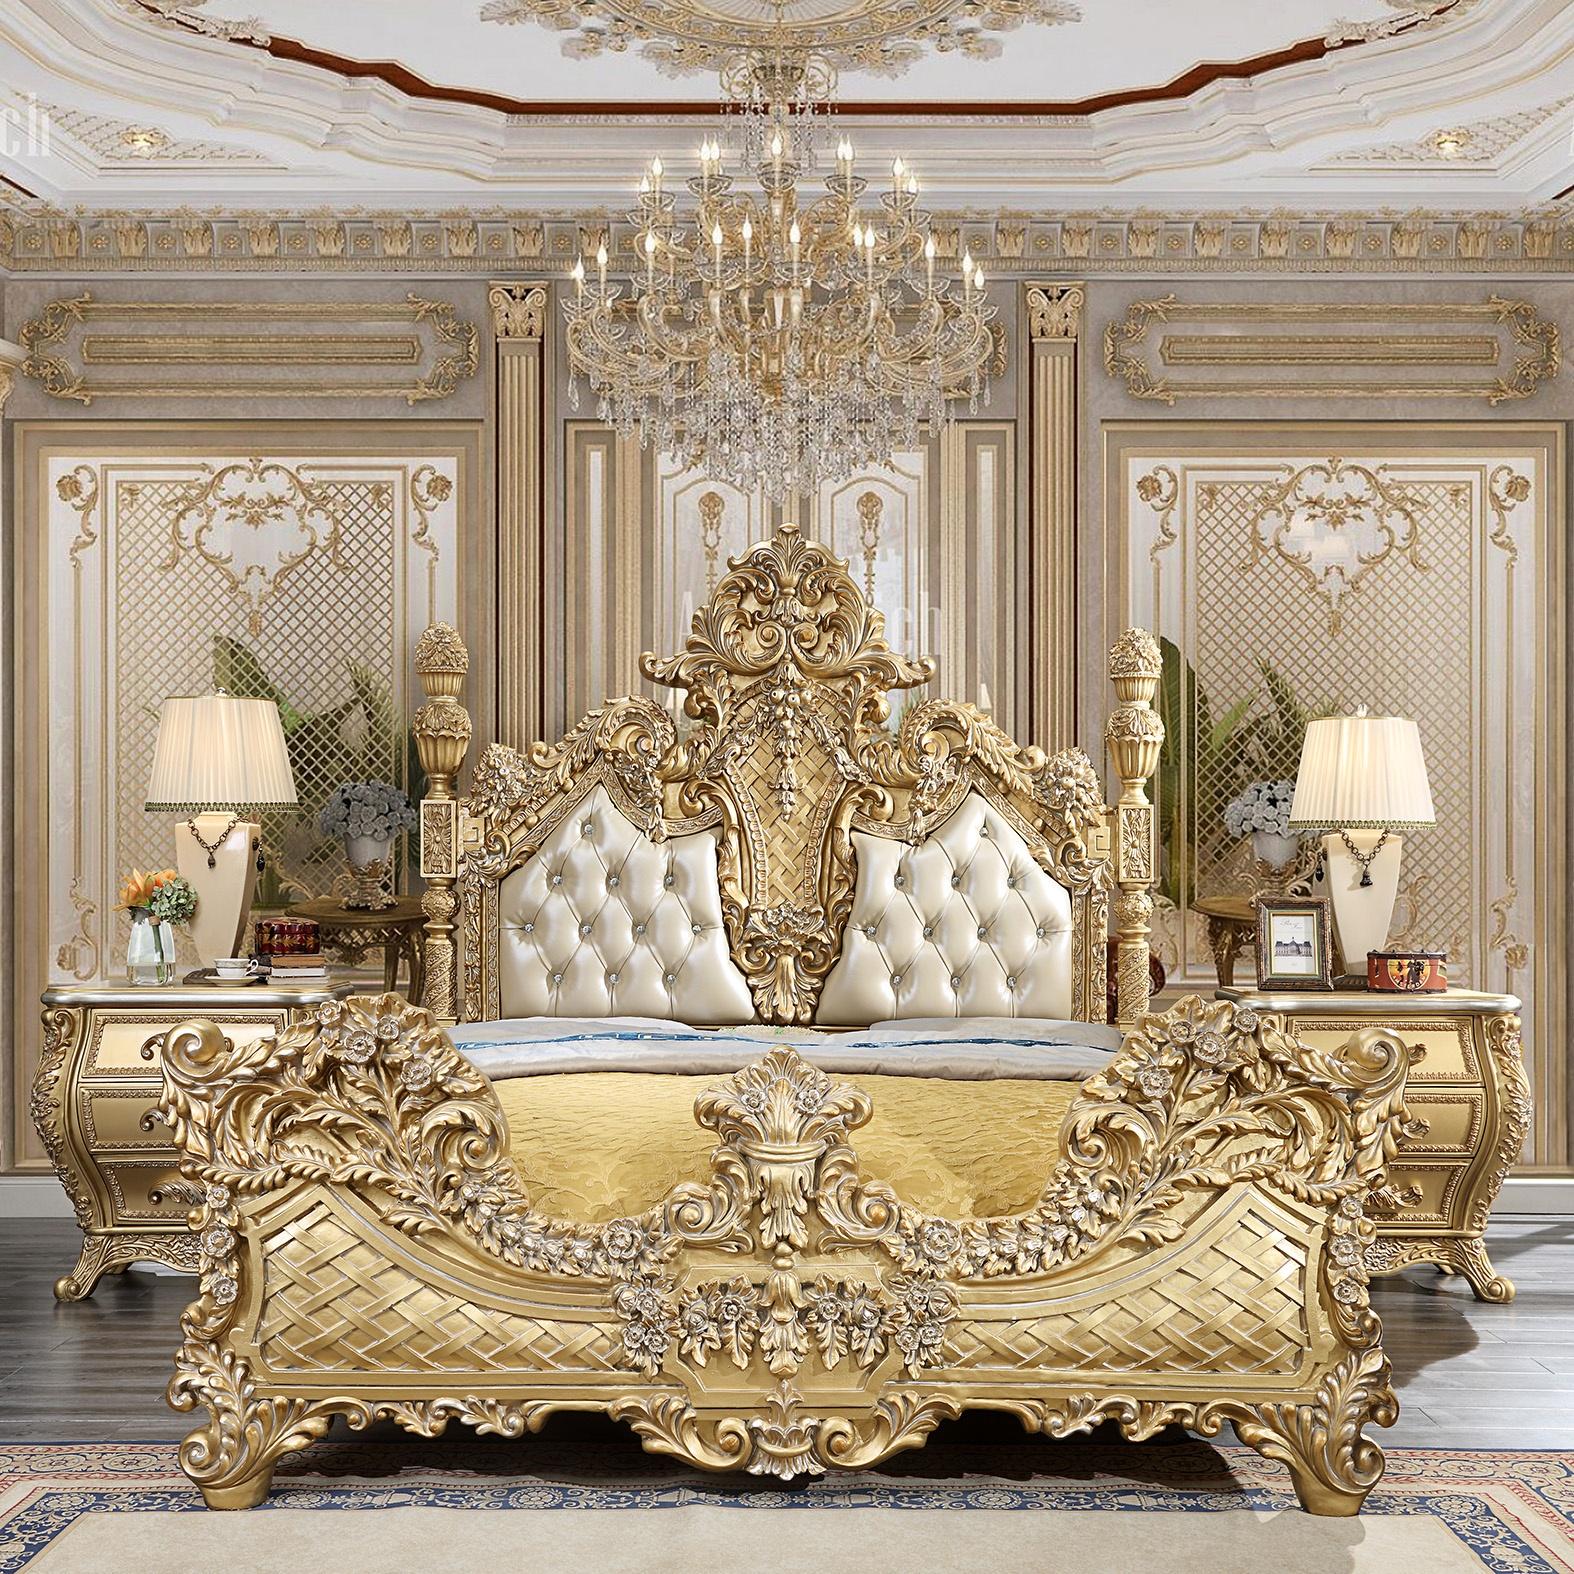 Traditional Panel Bed HD-1801 HD-1801 – CK BED in Metallic, Gold Finish, Antique Leather